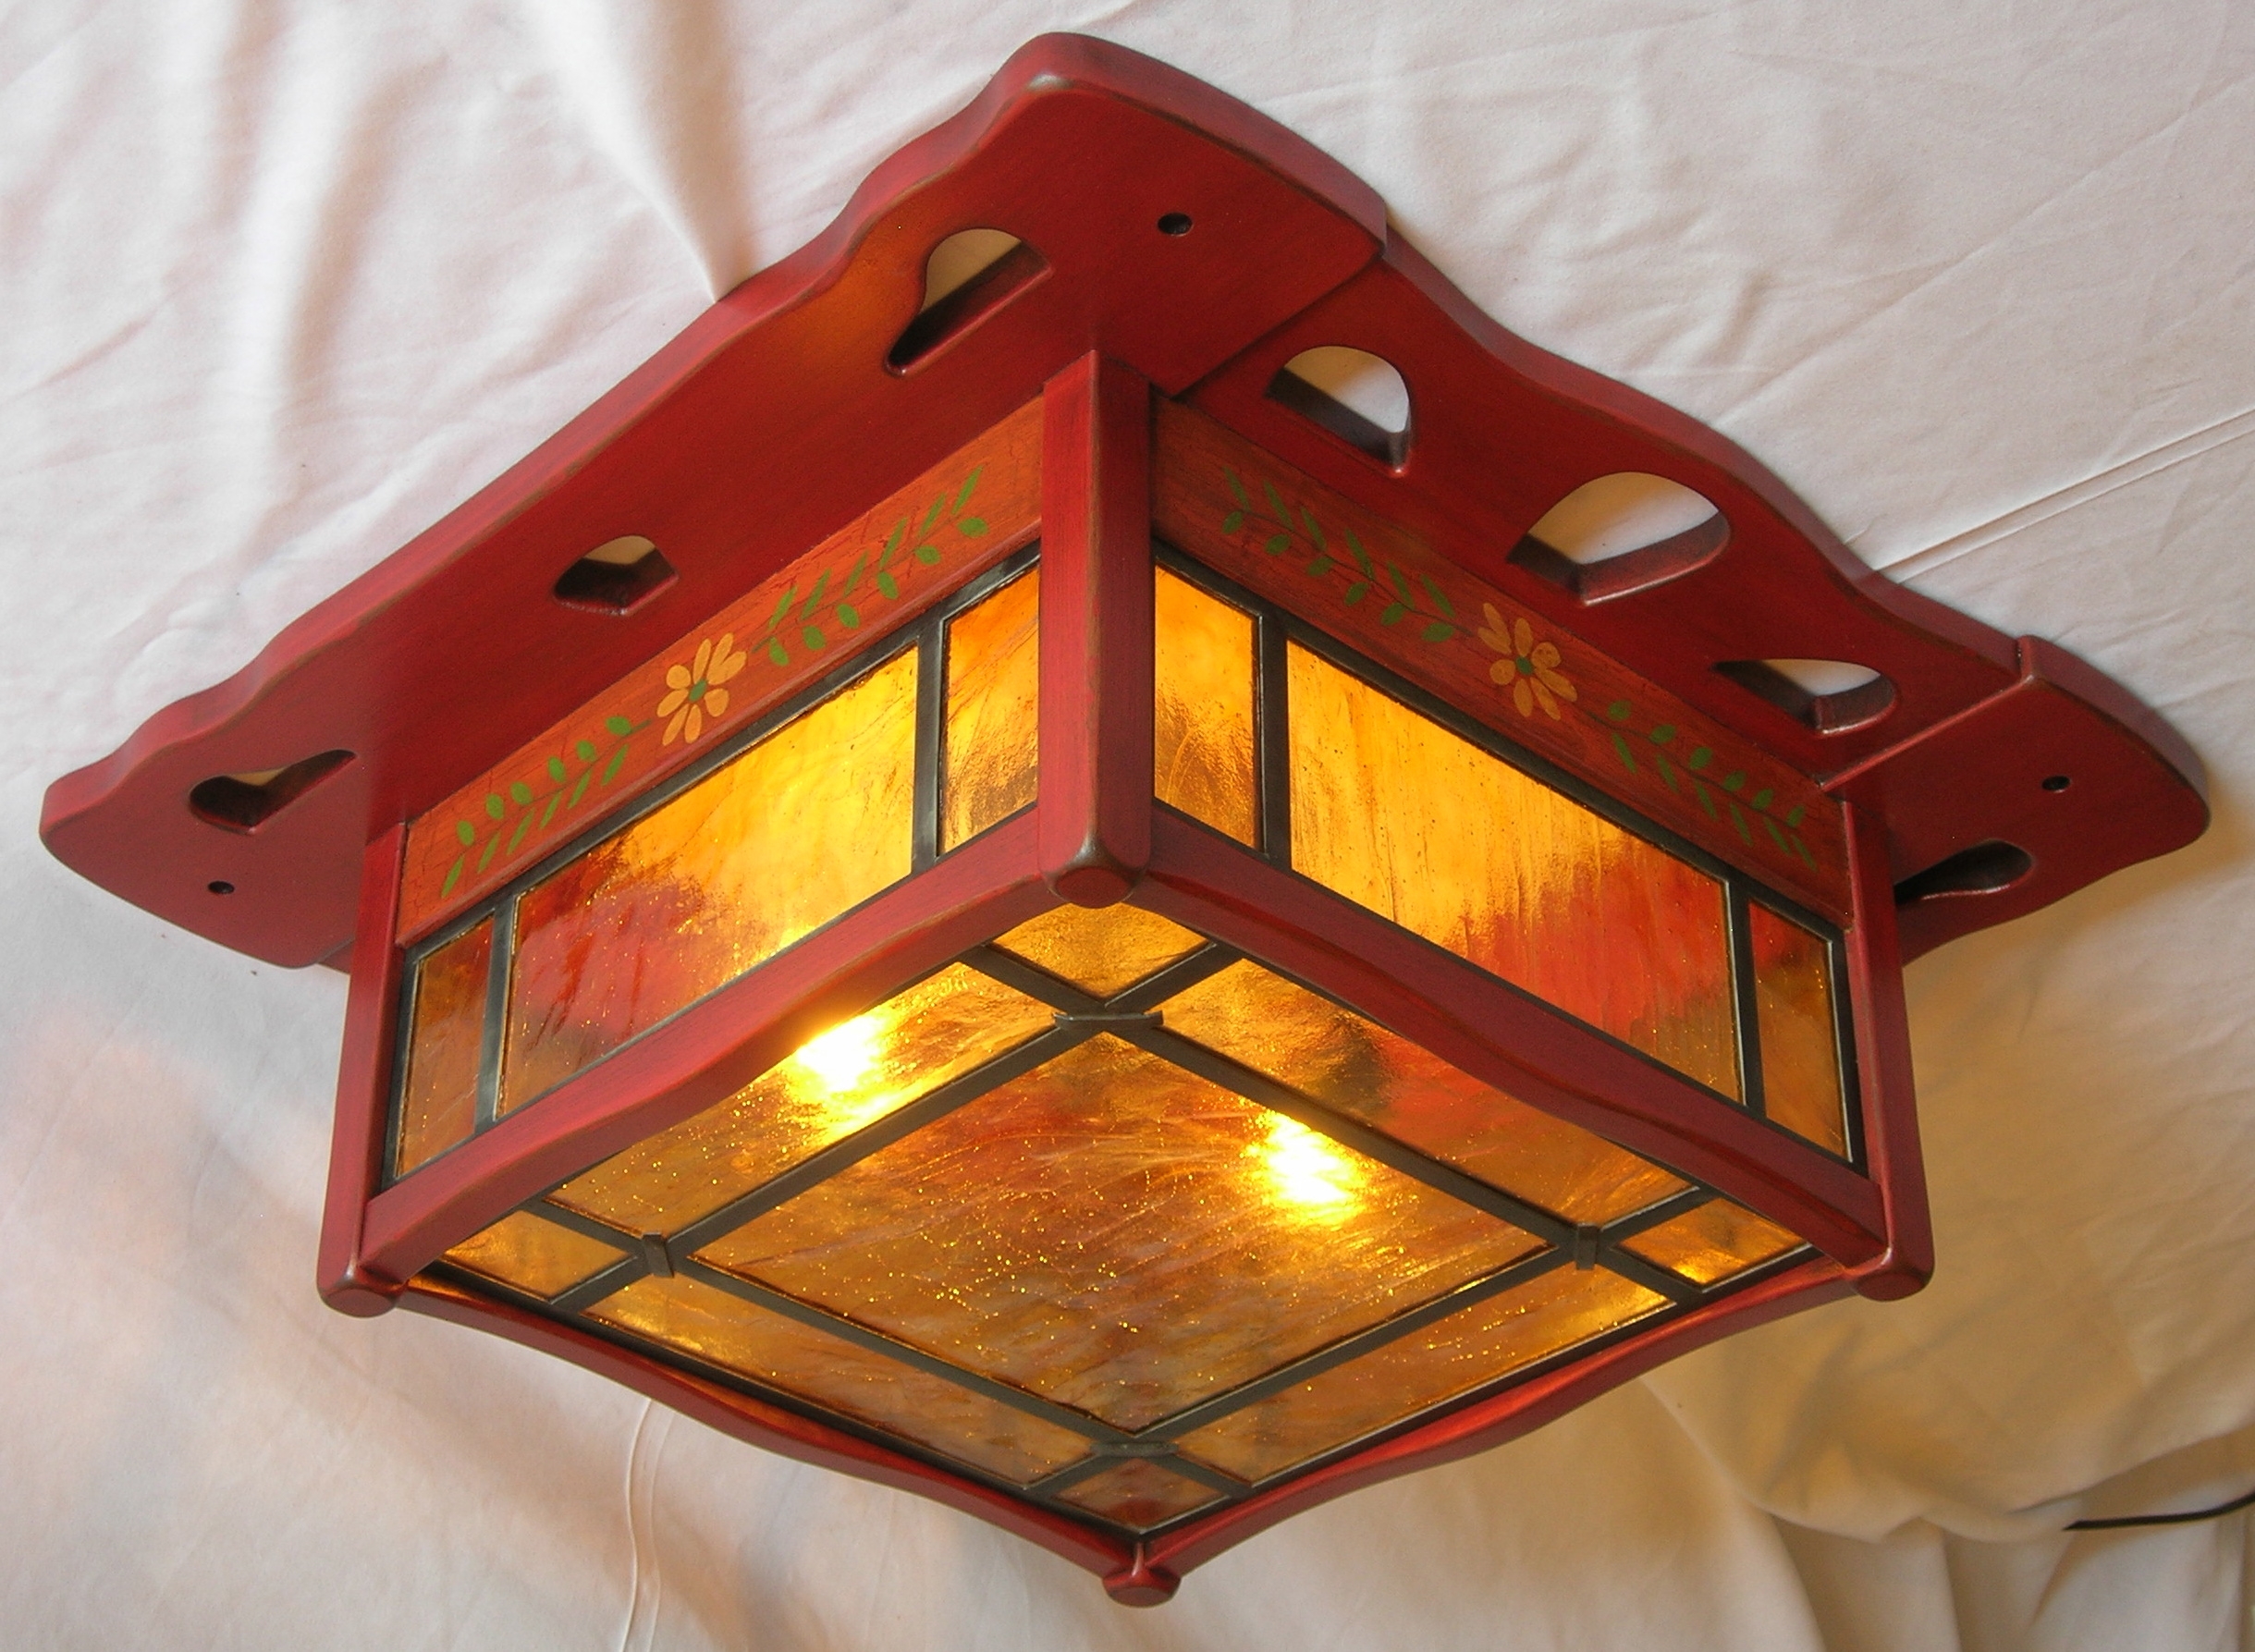 Arts And Crafts Style Ceiling Lights100 ideas arts crafts lighting fixtures on cropost